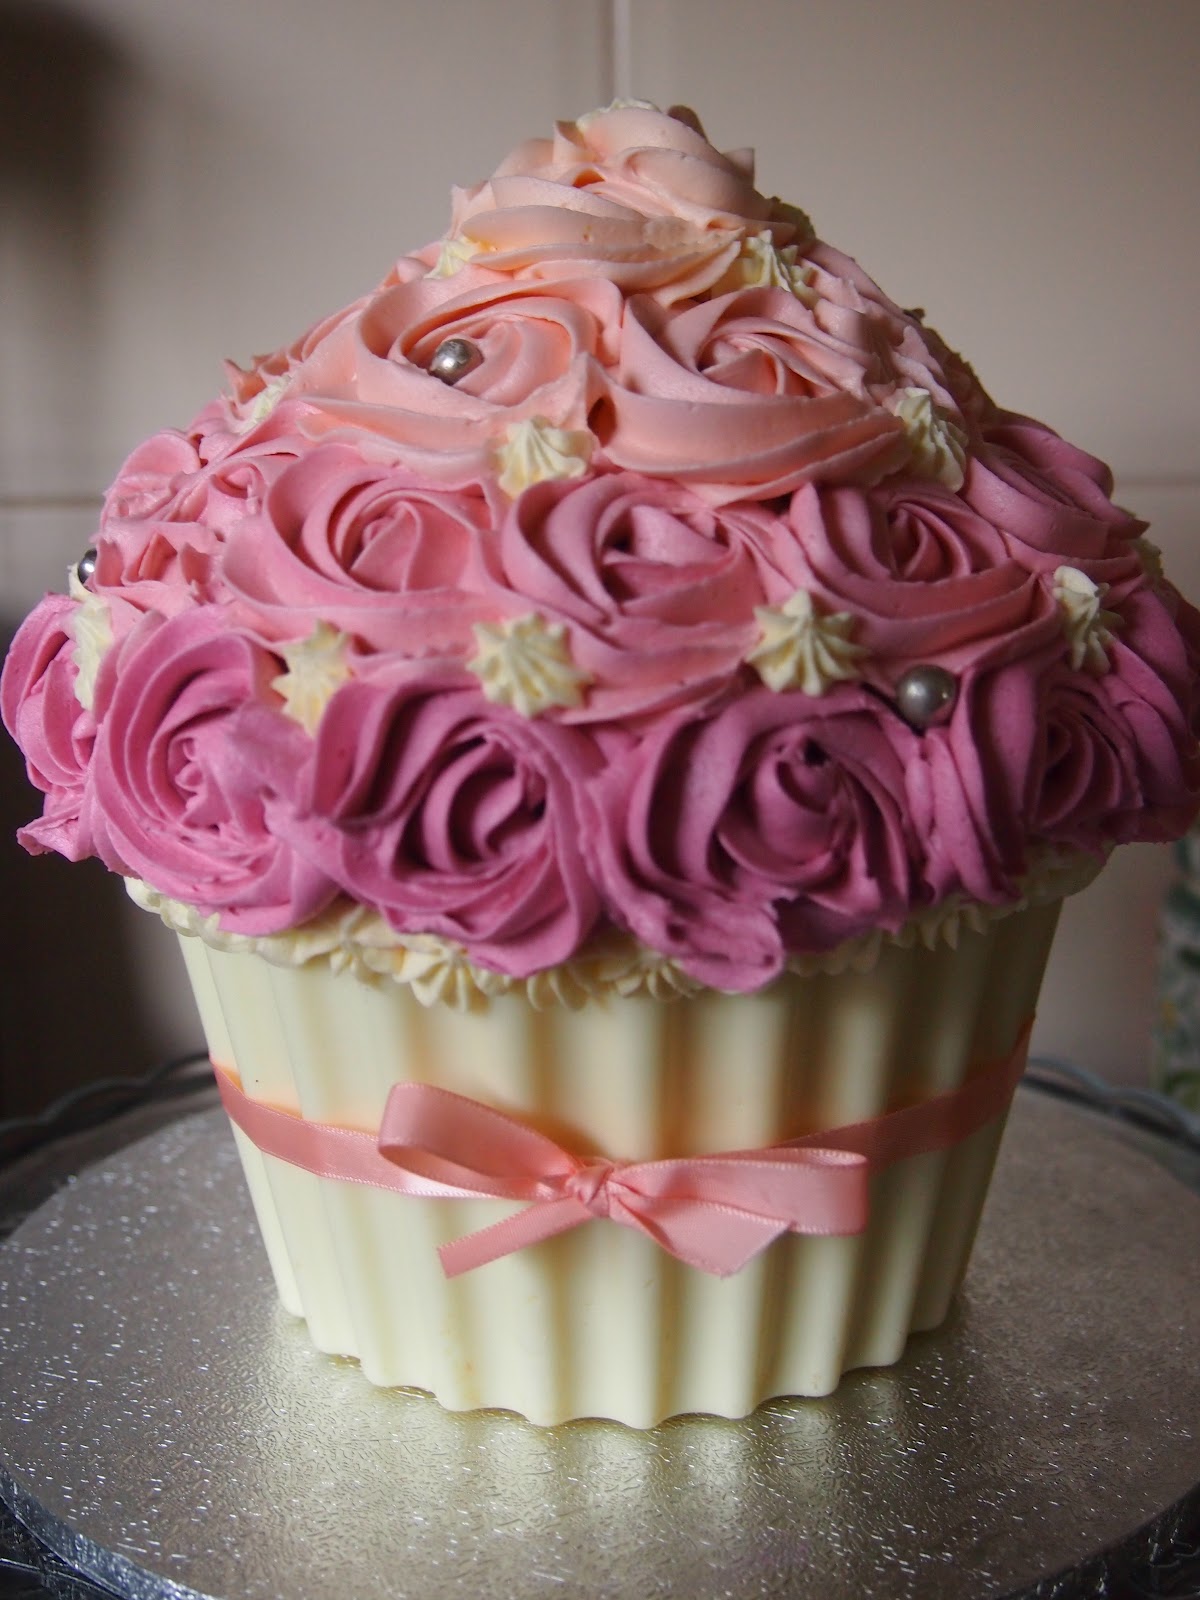 41 Top Photos How To Decorate A Giant Cupcake - Cute Cupcake Ideas | Cute Rose Giant Cupcake - by sajo ...